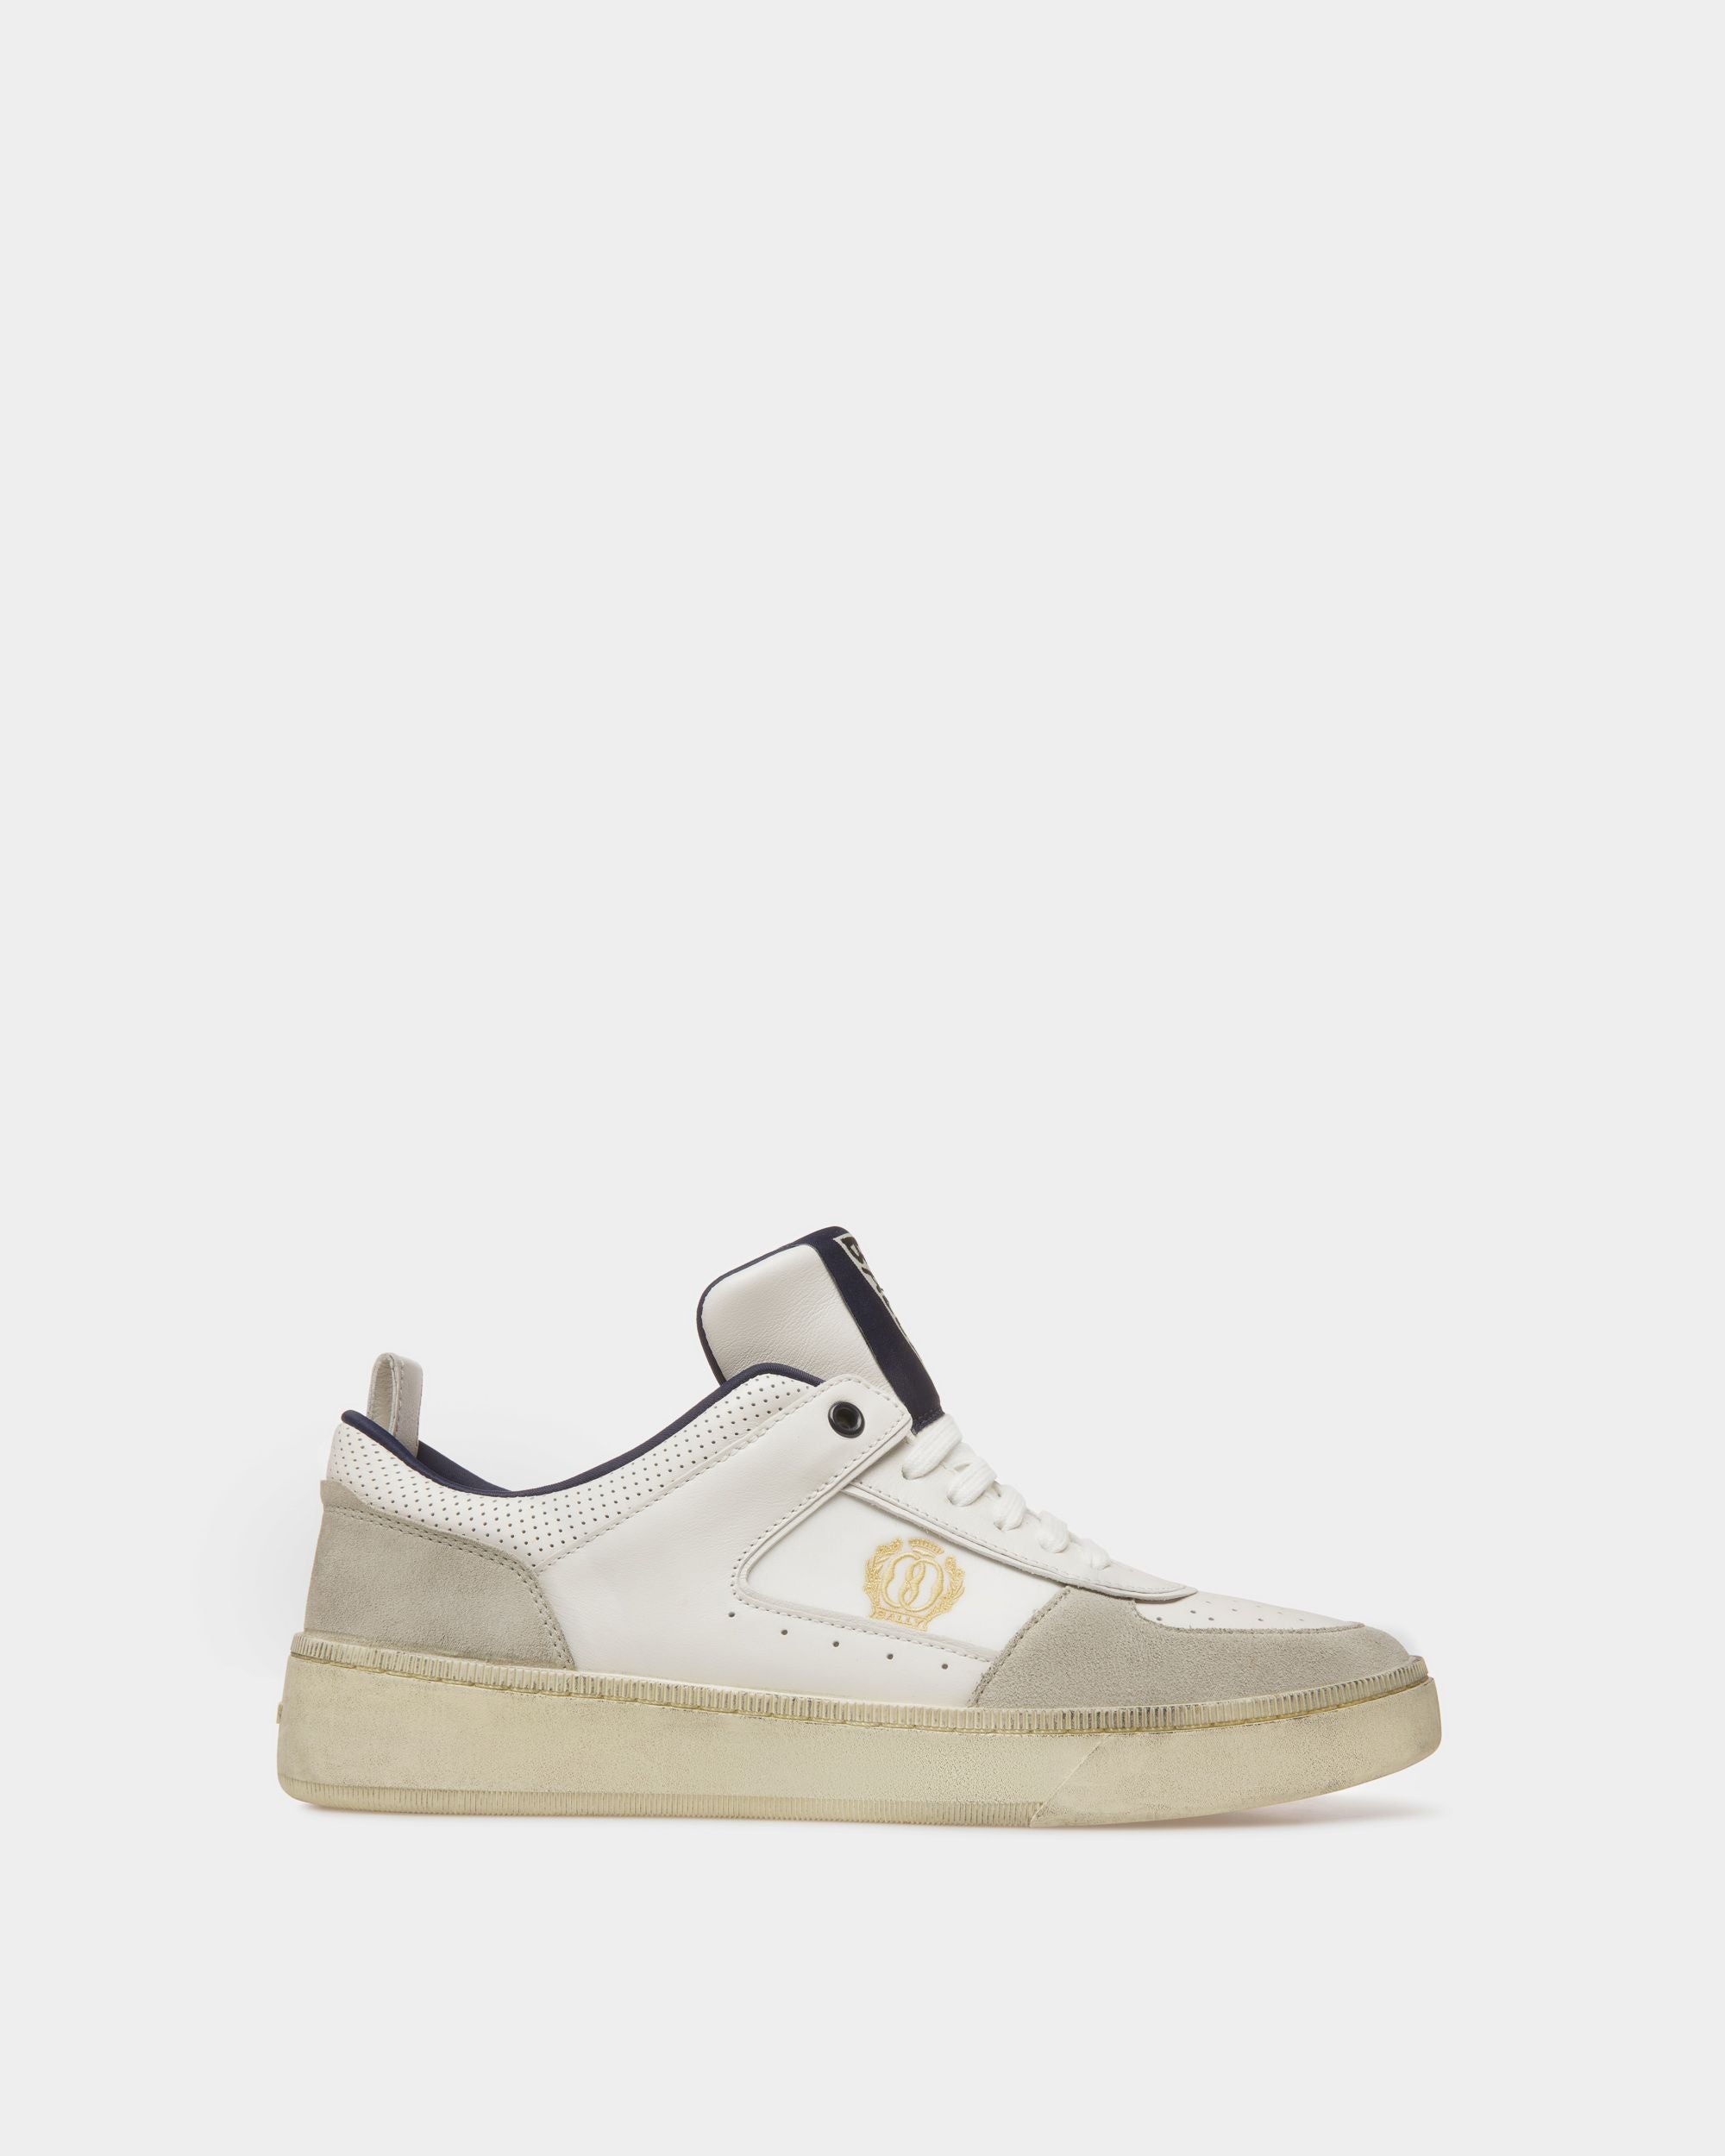 Riweira | Men's Sneakers | Dusty White And Midnight Leather And Fabric | Bally | Still Life Side